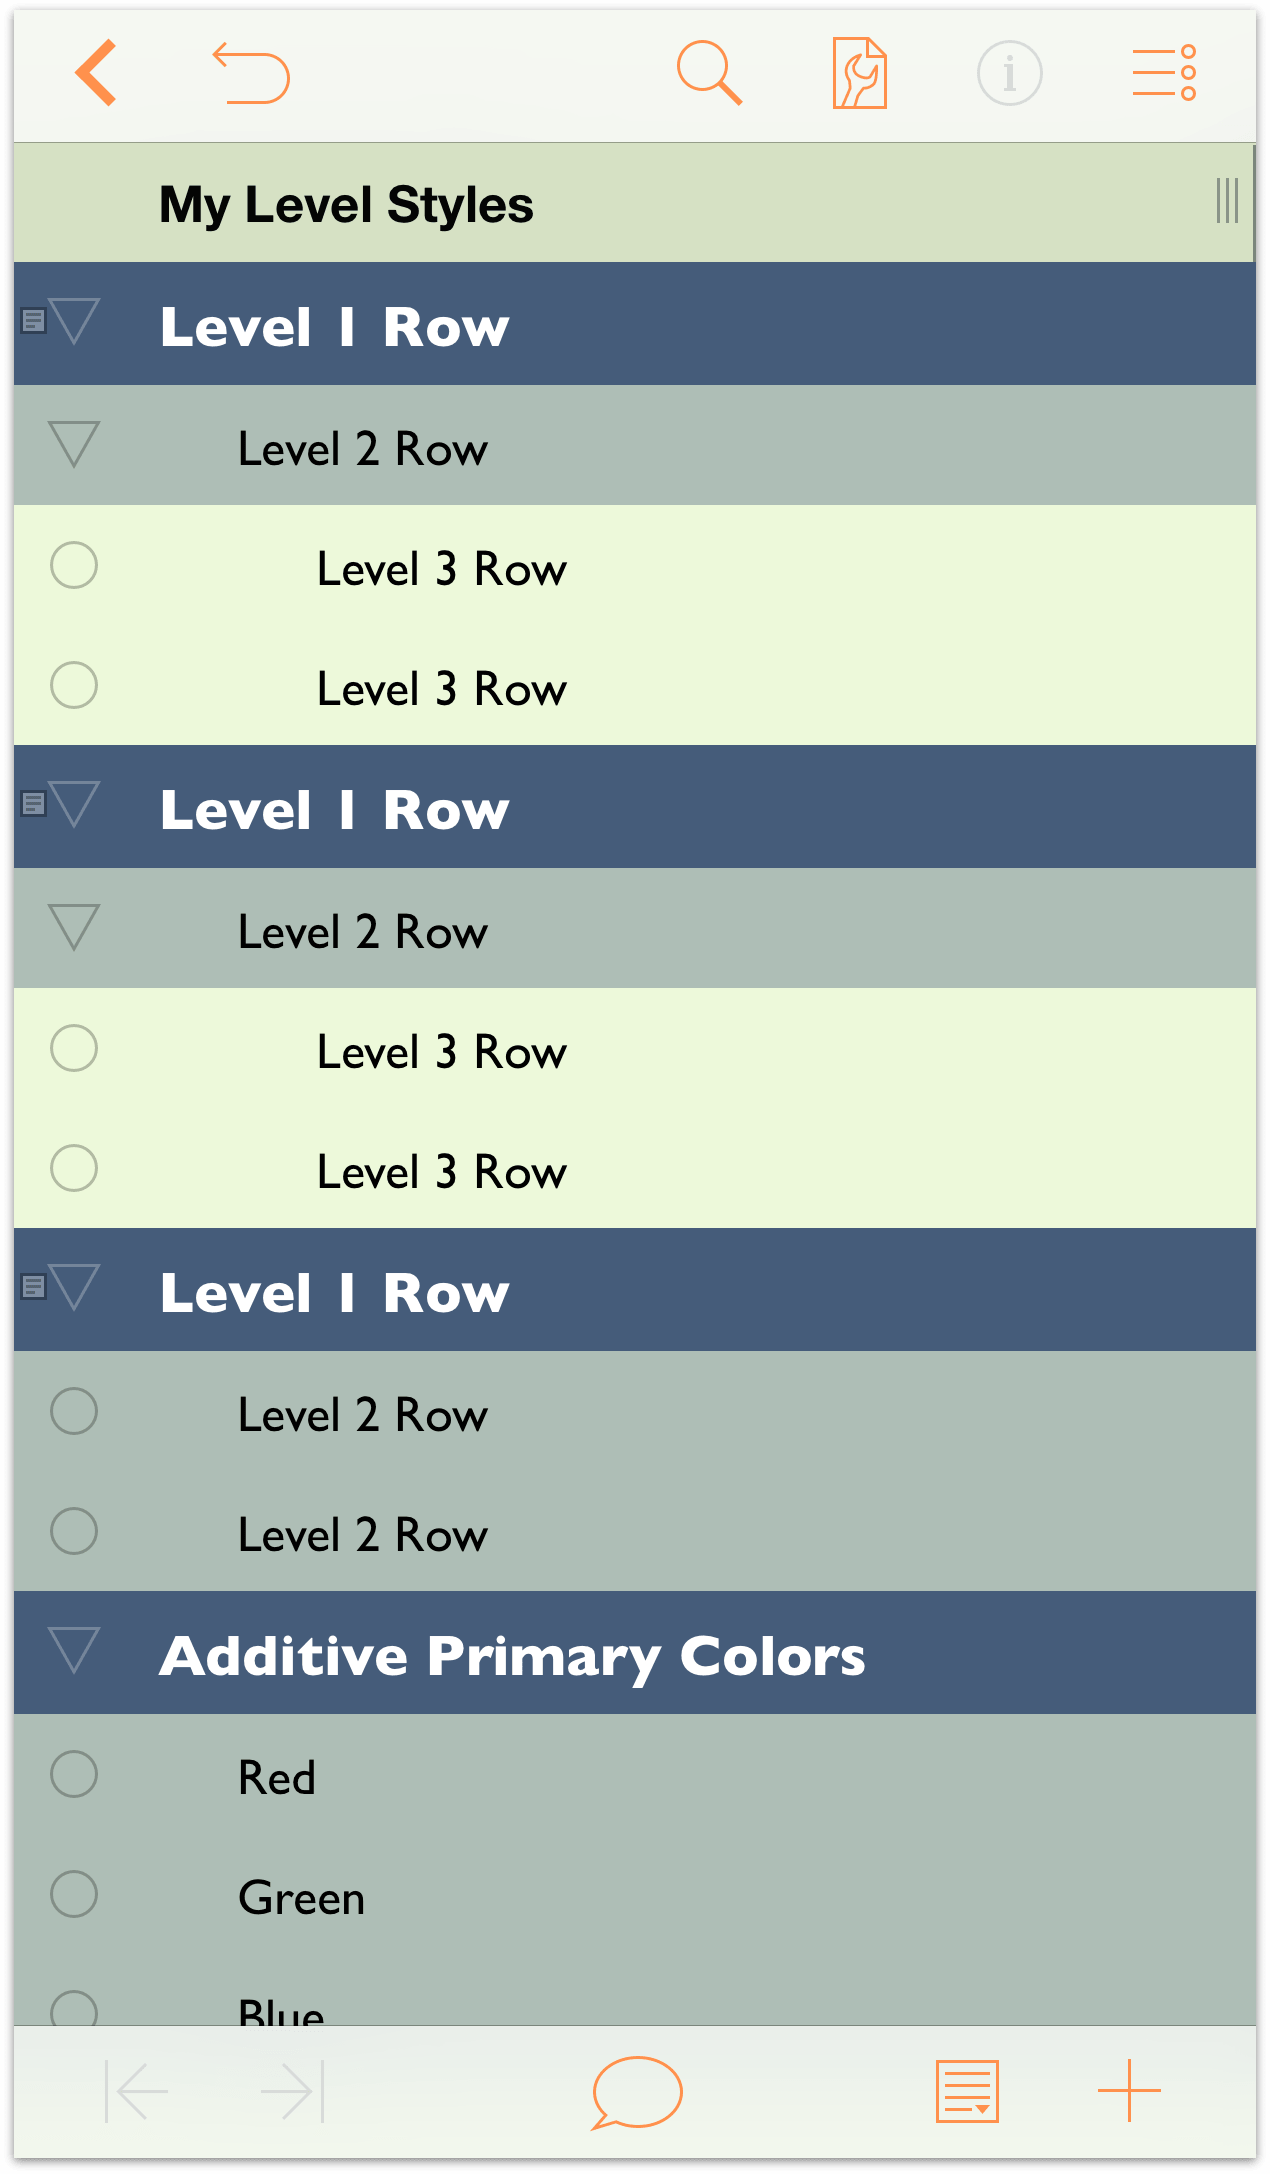 The outline showing the results of your work on the Level 2 Row styles